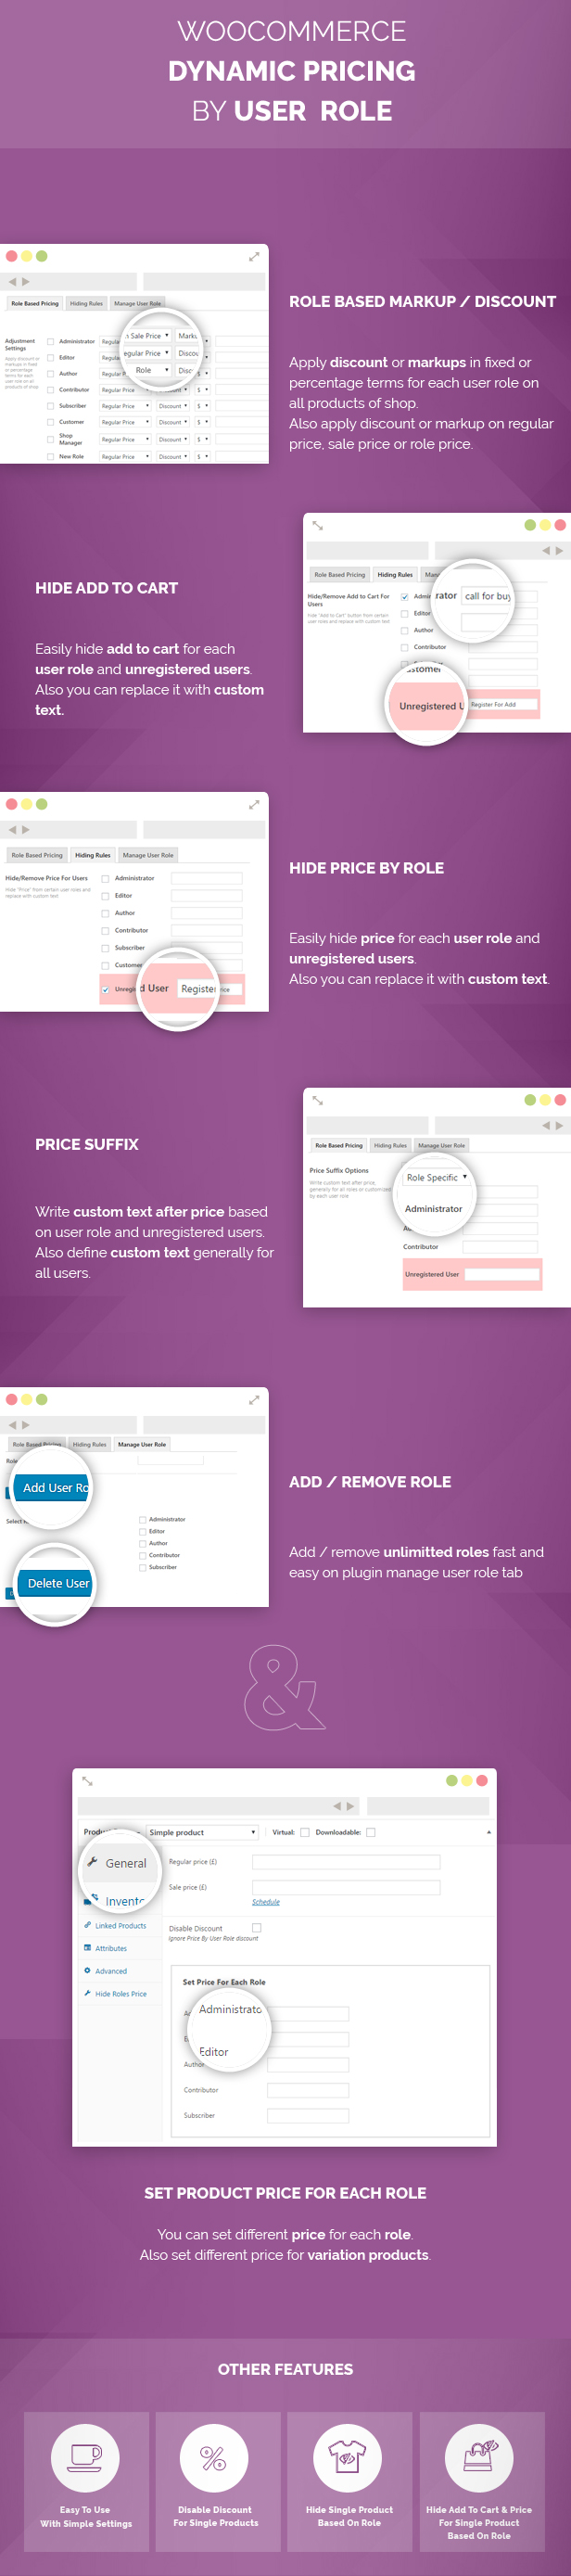 Woocommerce Dynamic Pricing By User Role - 1